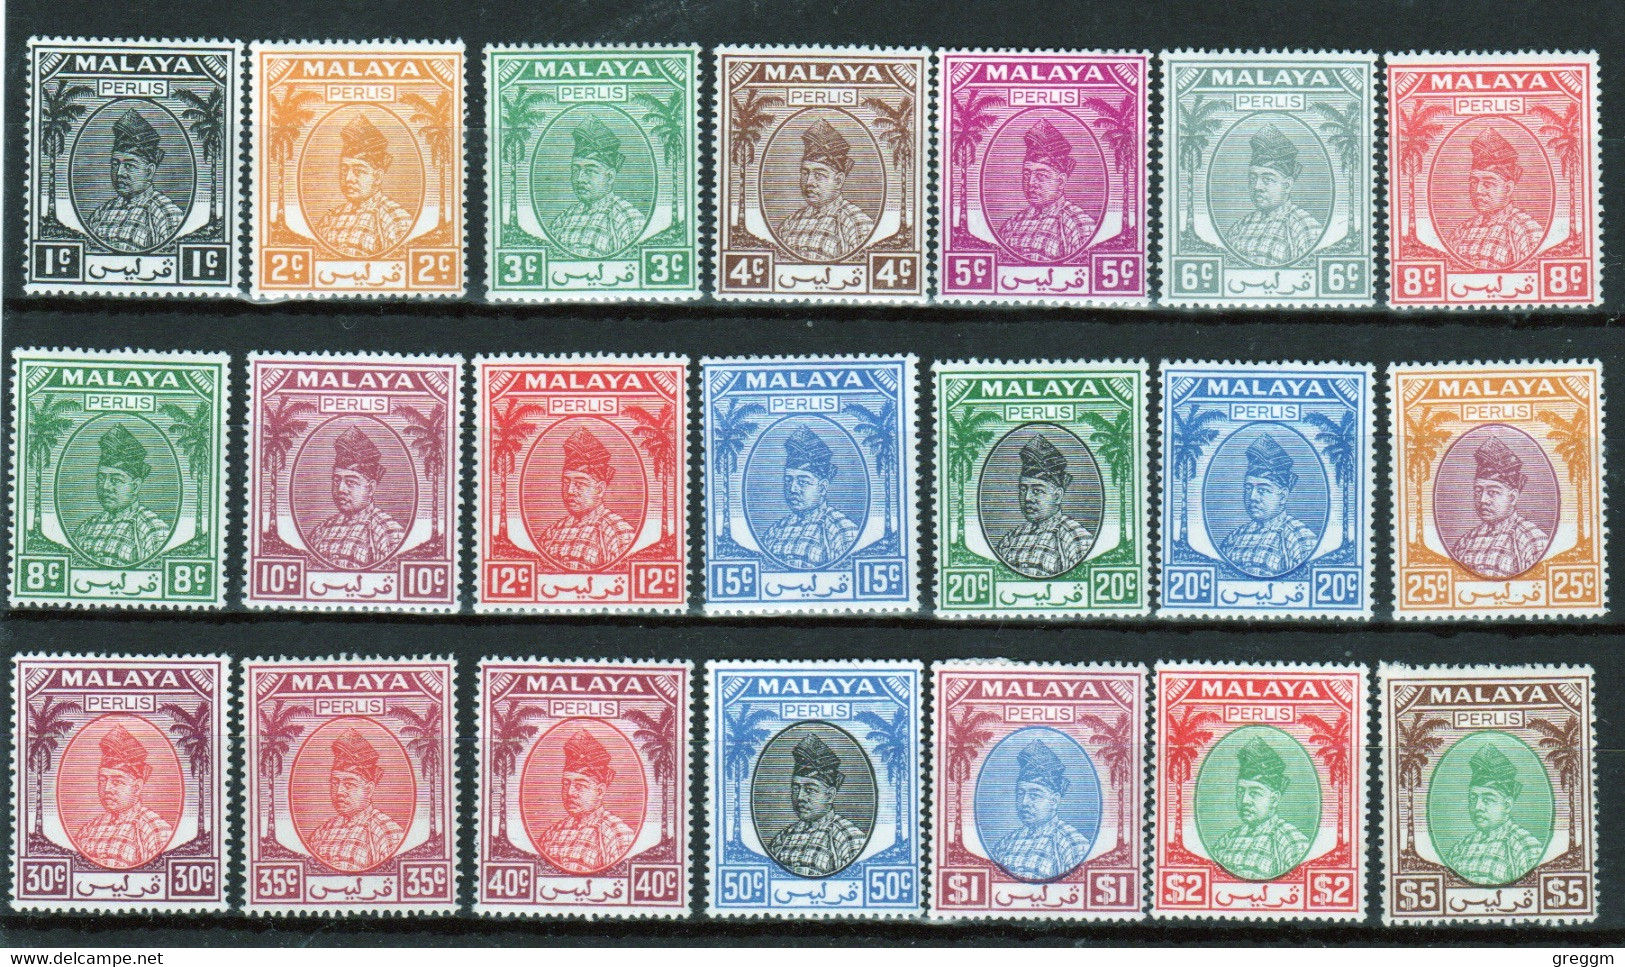 Perlis 1951 Complete Set Of Definitives In Mounted Mint. - Perlis